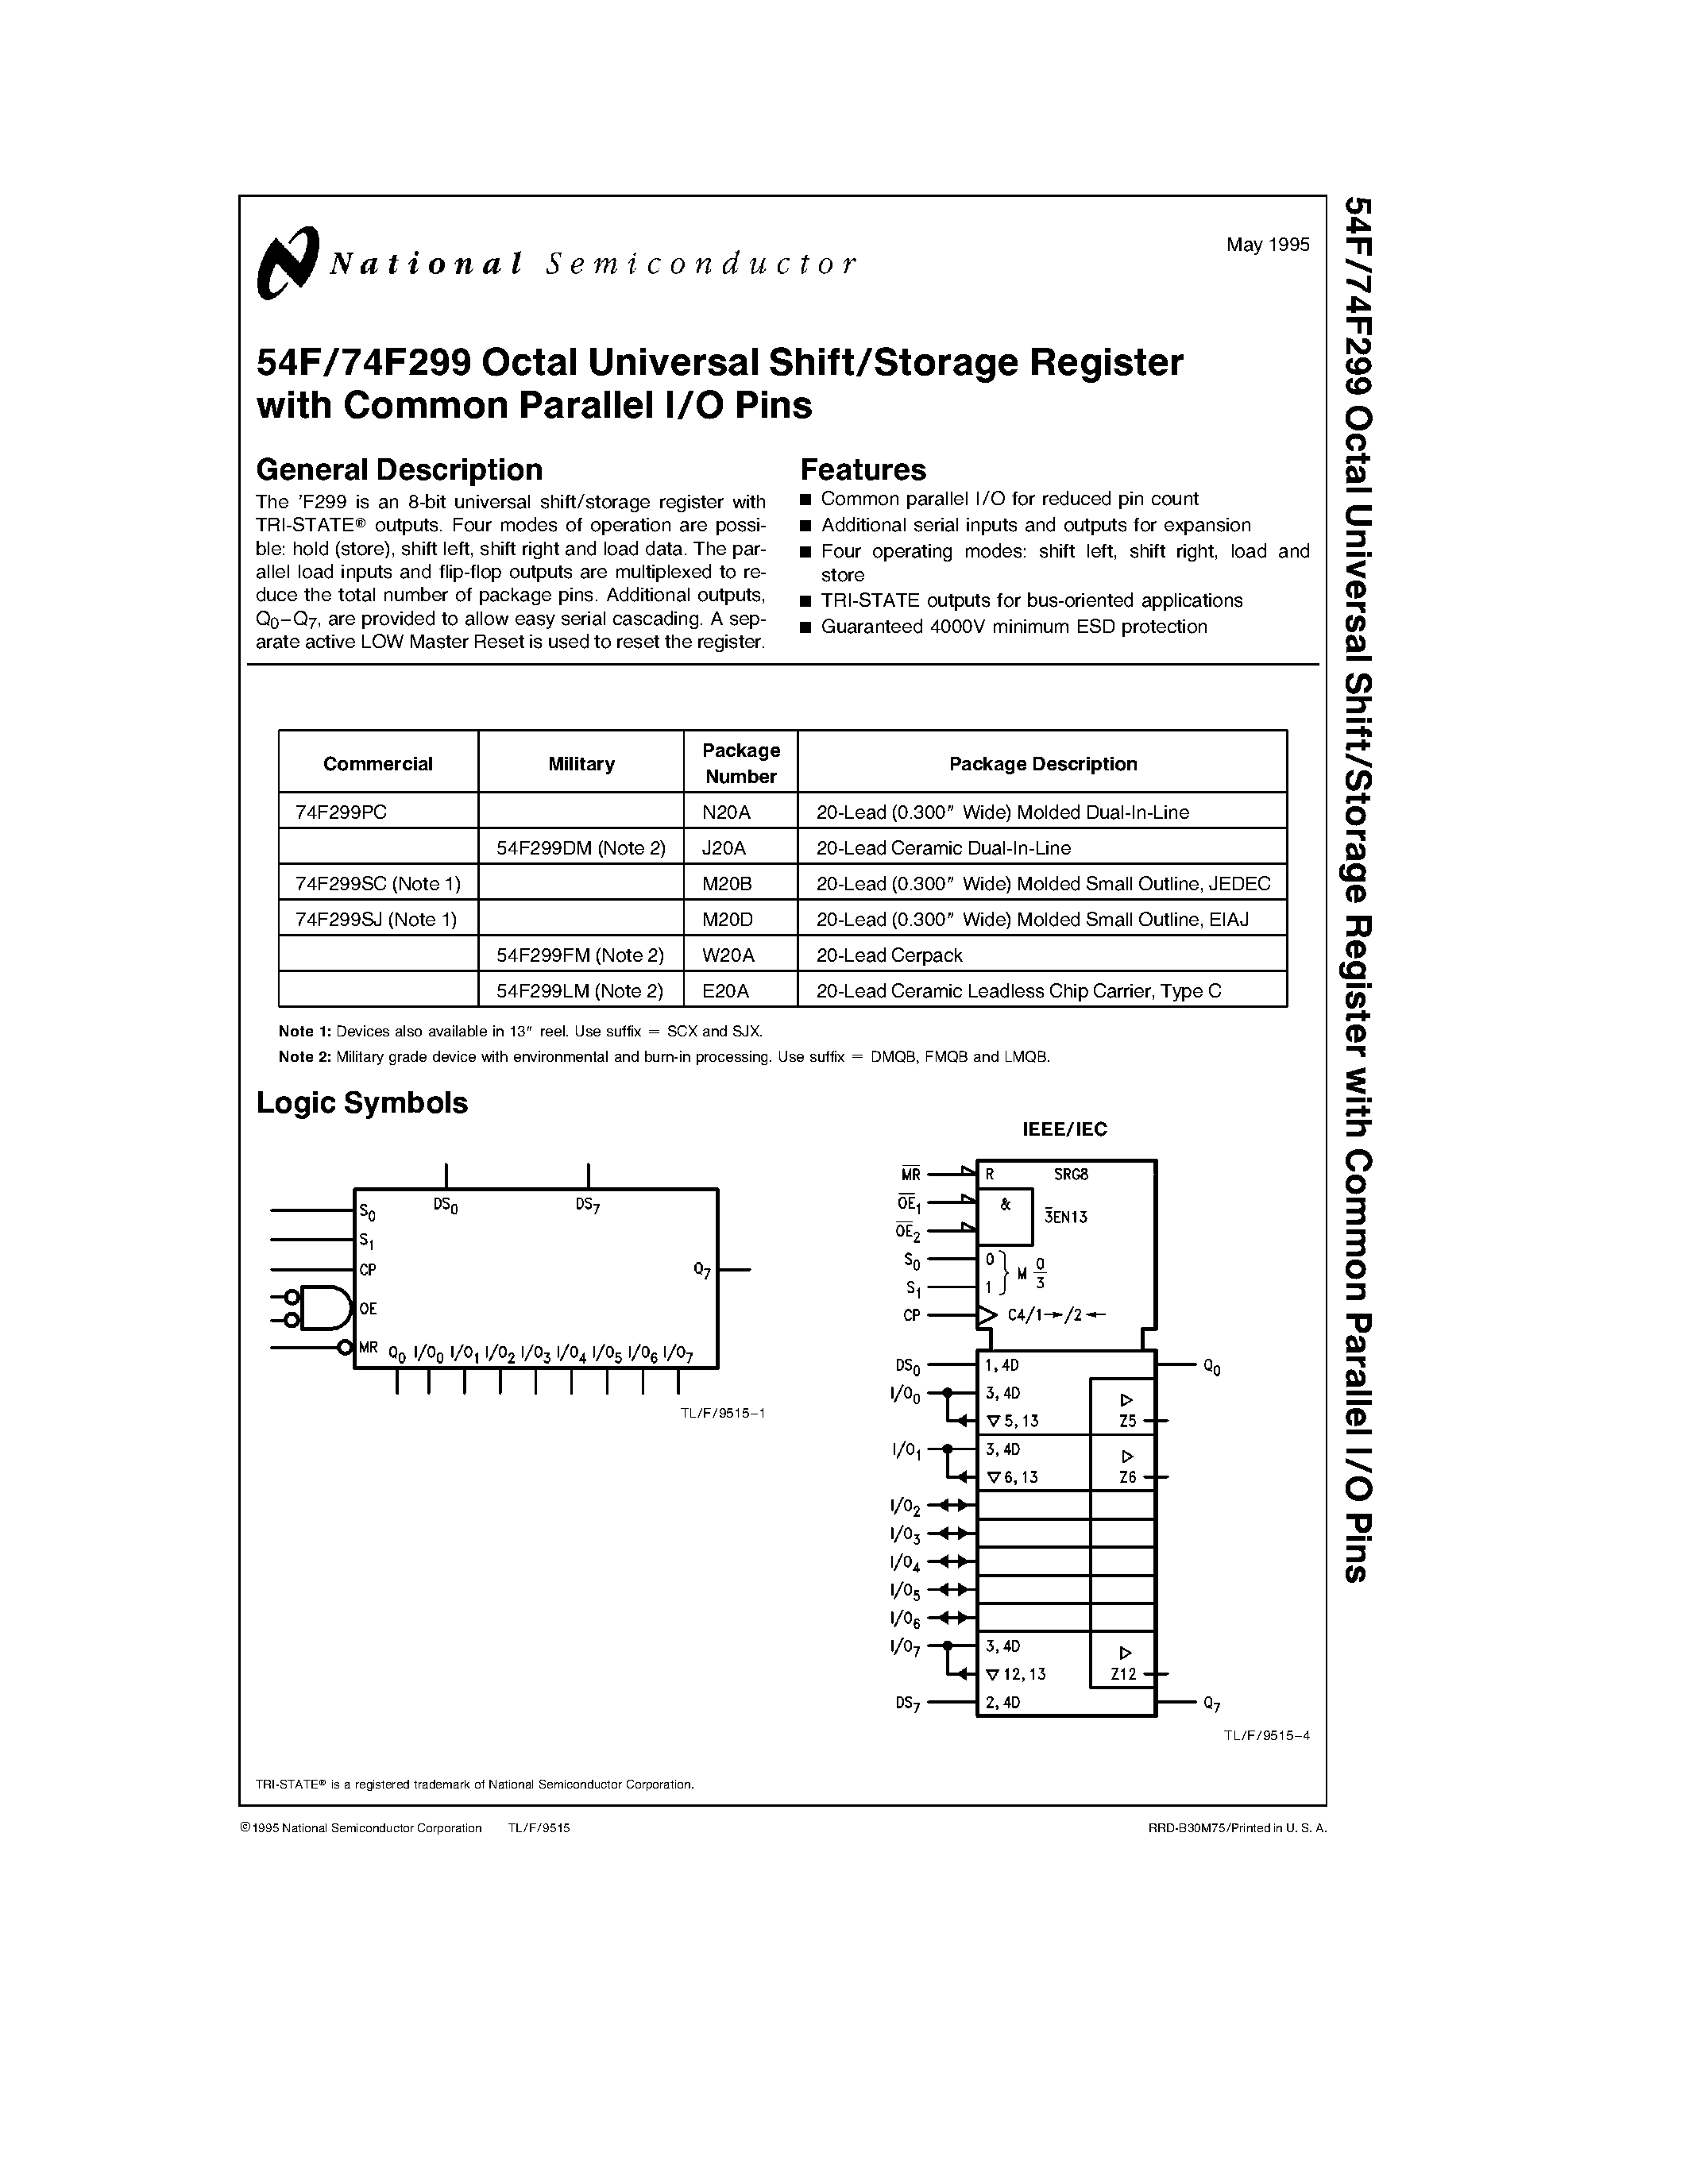 Даташит 74F299 - Octal Universal Shift/Storage Register with Common Parallel I/O Pins страница 1